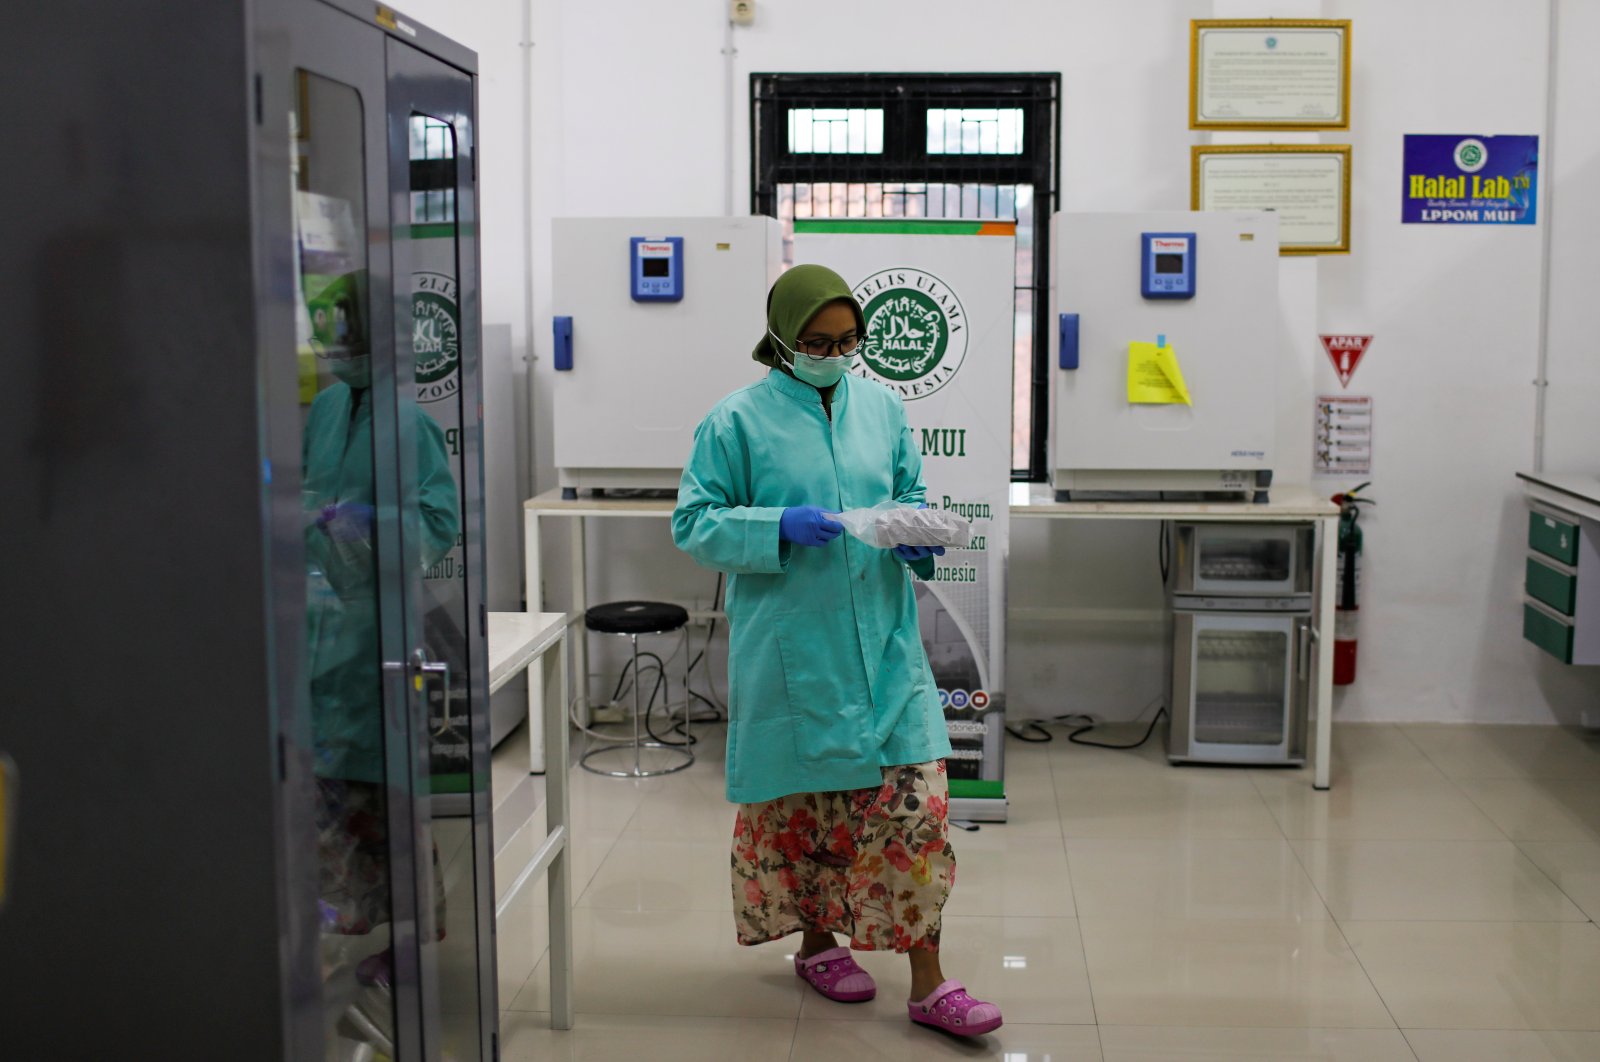 An analyst at the Global Halal Center walks inside a laboratory, where Sinovac's vaccine for the coronavirus disease (COVID-19) was analyzed for halal certification, in Bogor, Indonesia, Jan. 6, 2021. (Reuters Photo)